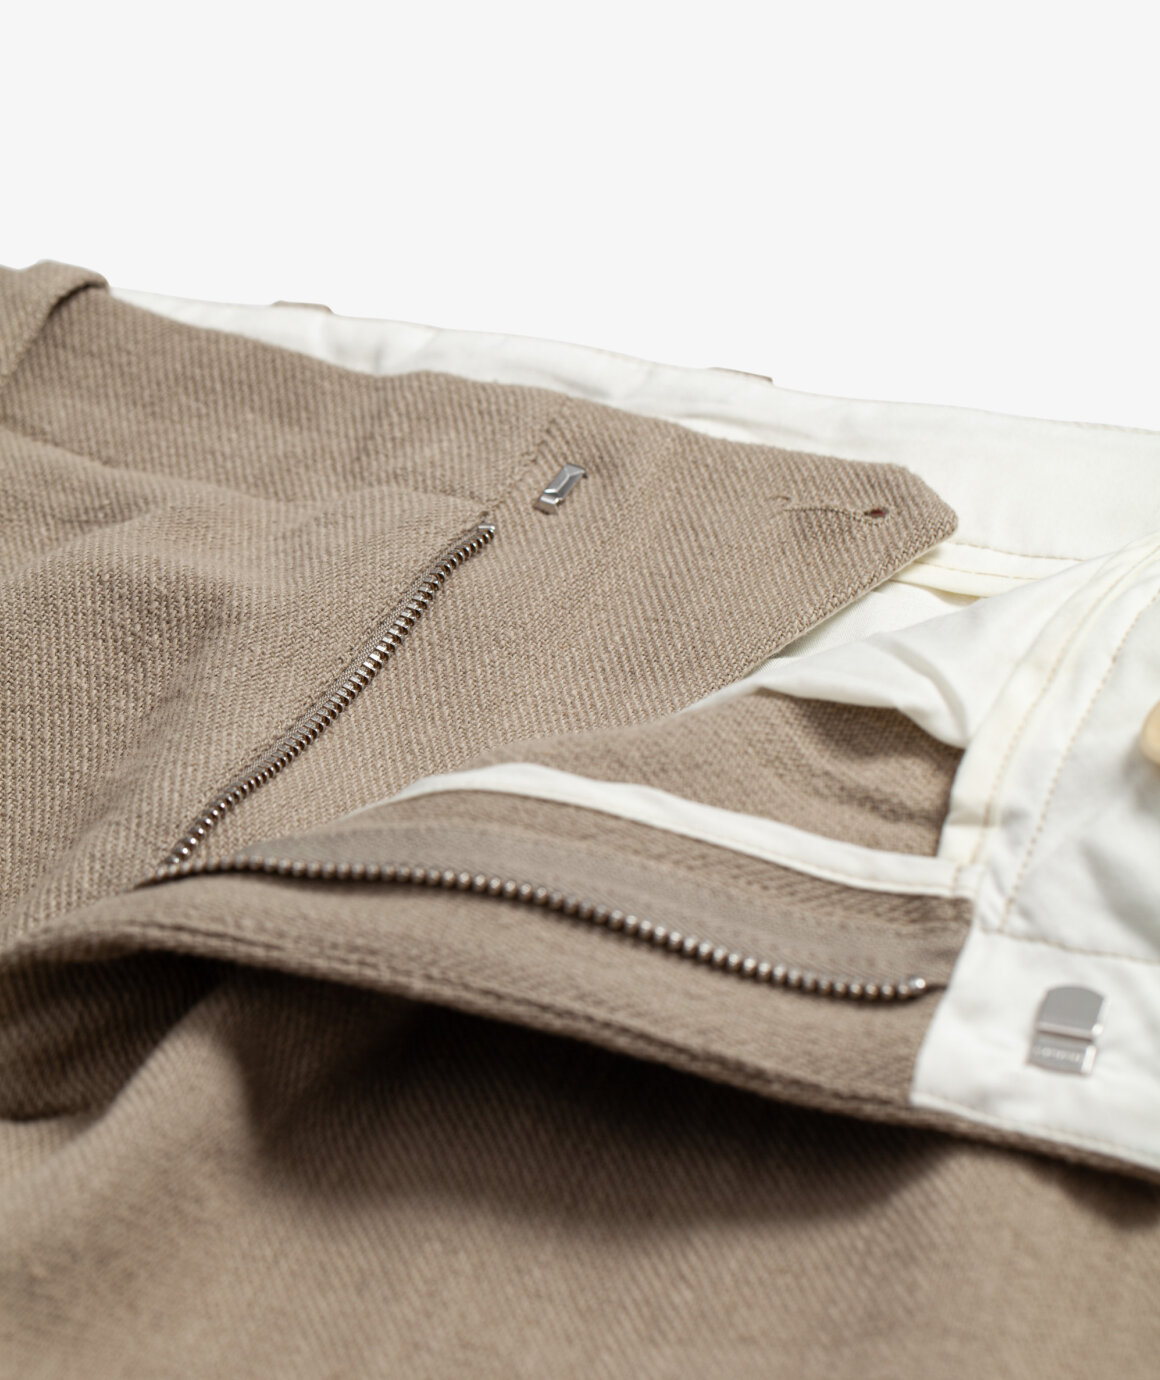 Norse Store | Shipping Worldwide - Our Legacy Borrowed Chino - Khaki ...